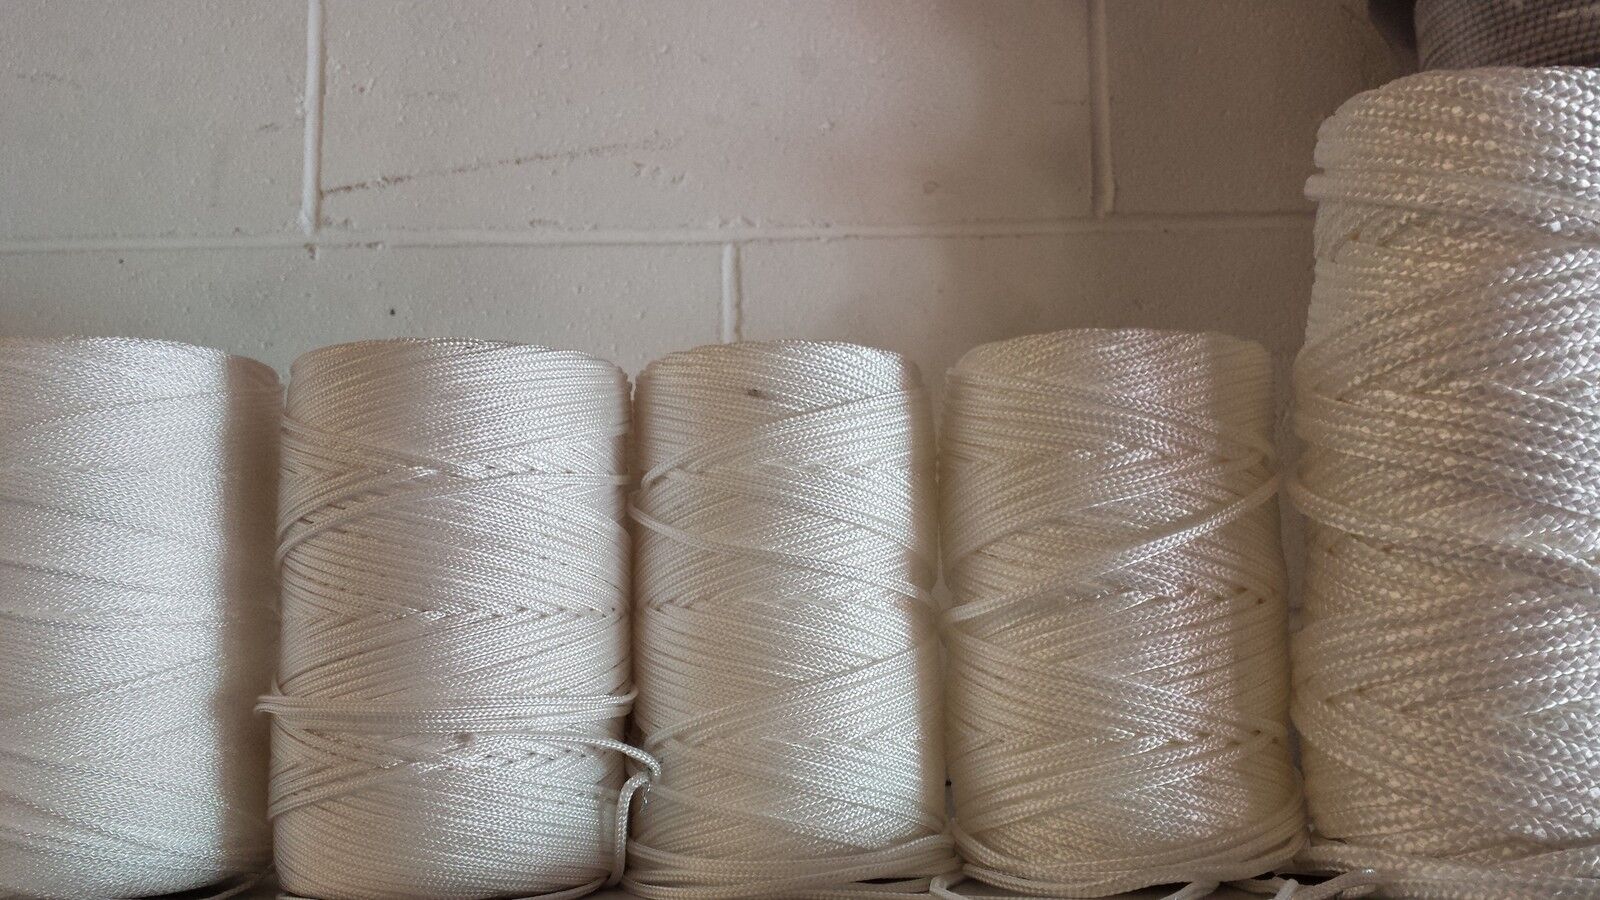 White Nylon Braided Cord Thread Twine (1.3mm 2mm 3mm 4mm and 6mm) x 20  Metres - More Than Just Ropes